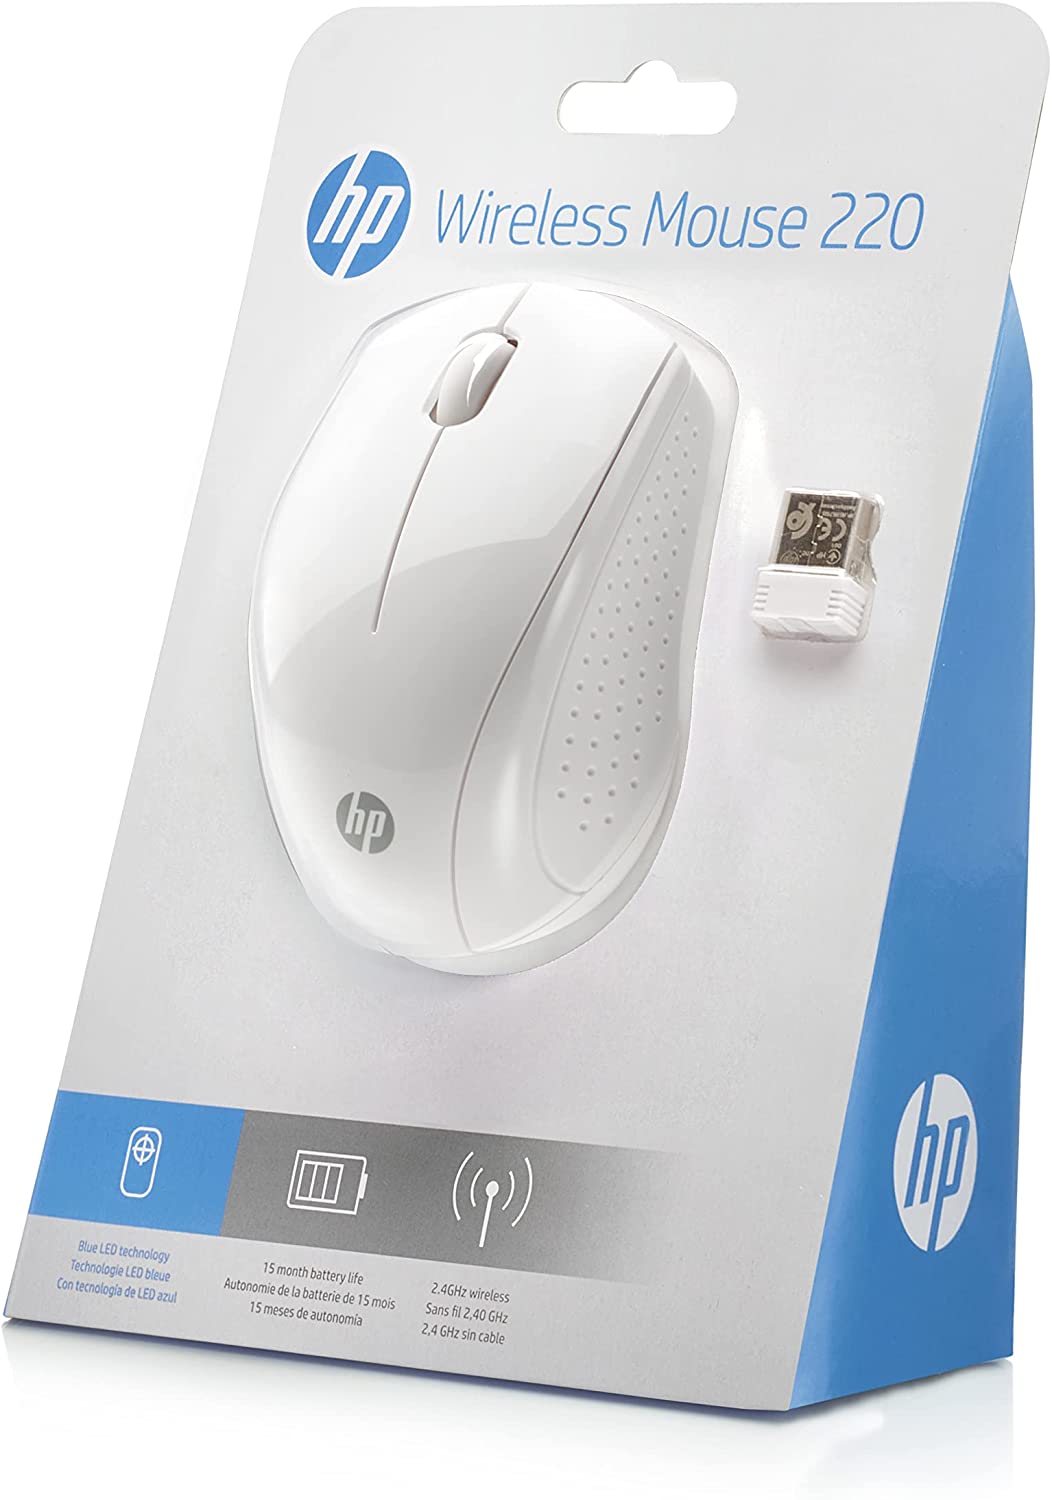 good wireless mouses for mac with wheel